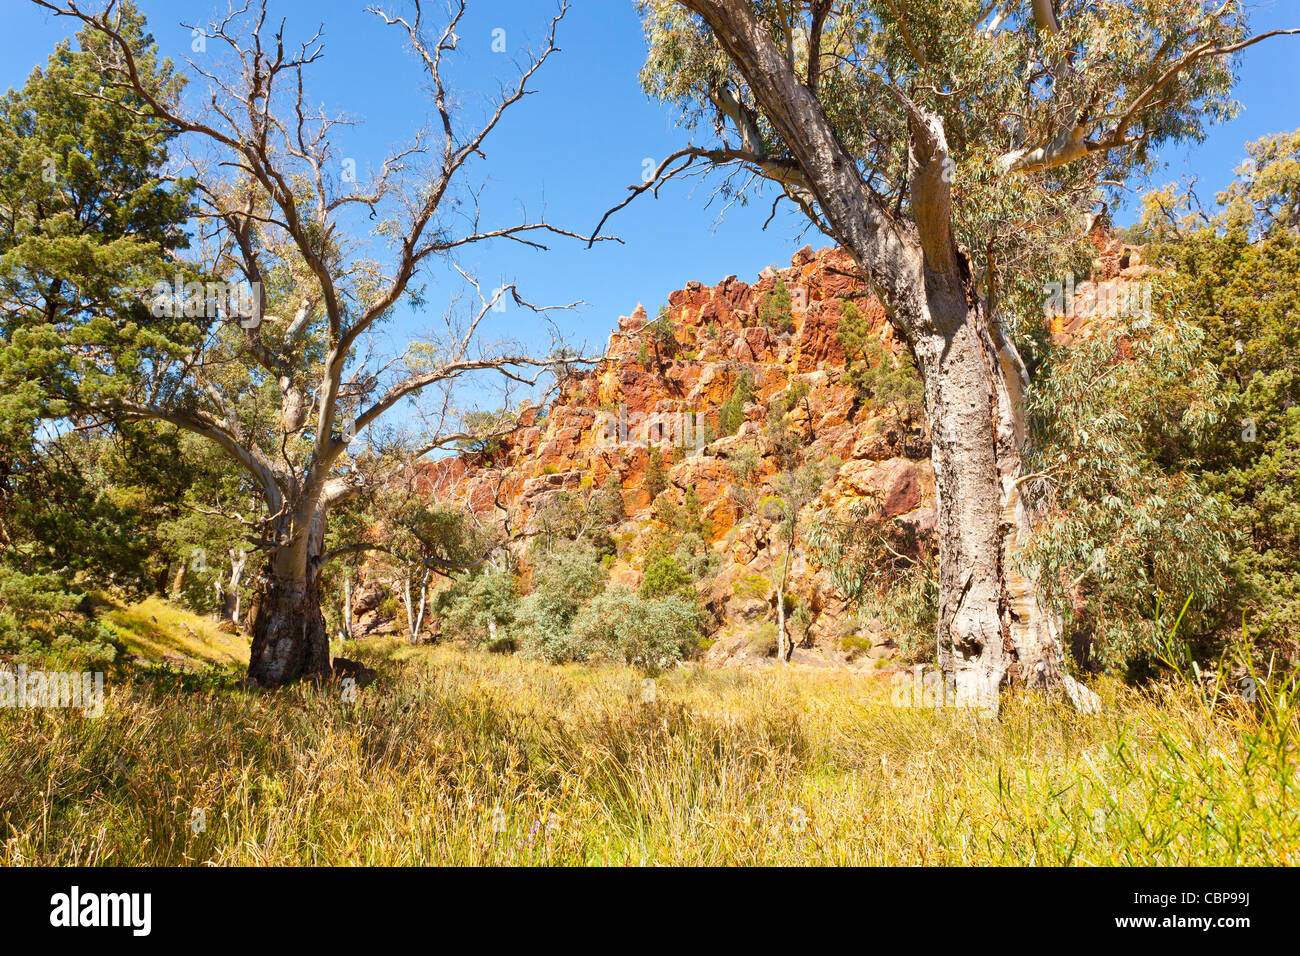 Old River Red Gum trees (Eucalyptus camaldulensis) in Warren Gorge near Quorn in the Flinders Ranges in outback South Australia, Australia Stock Photo